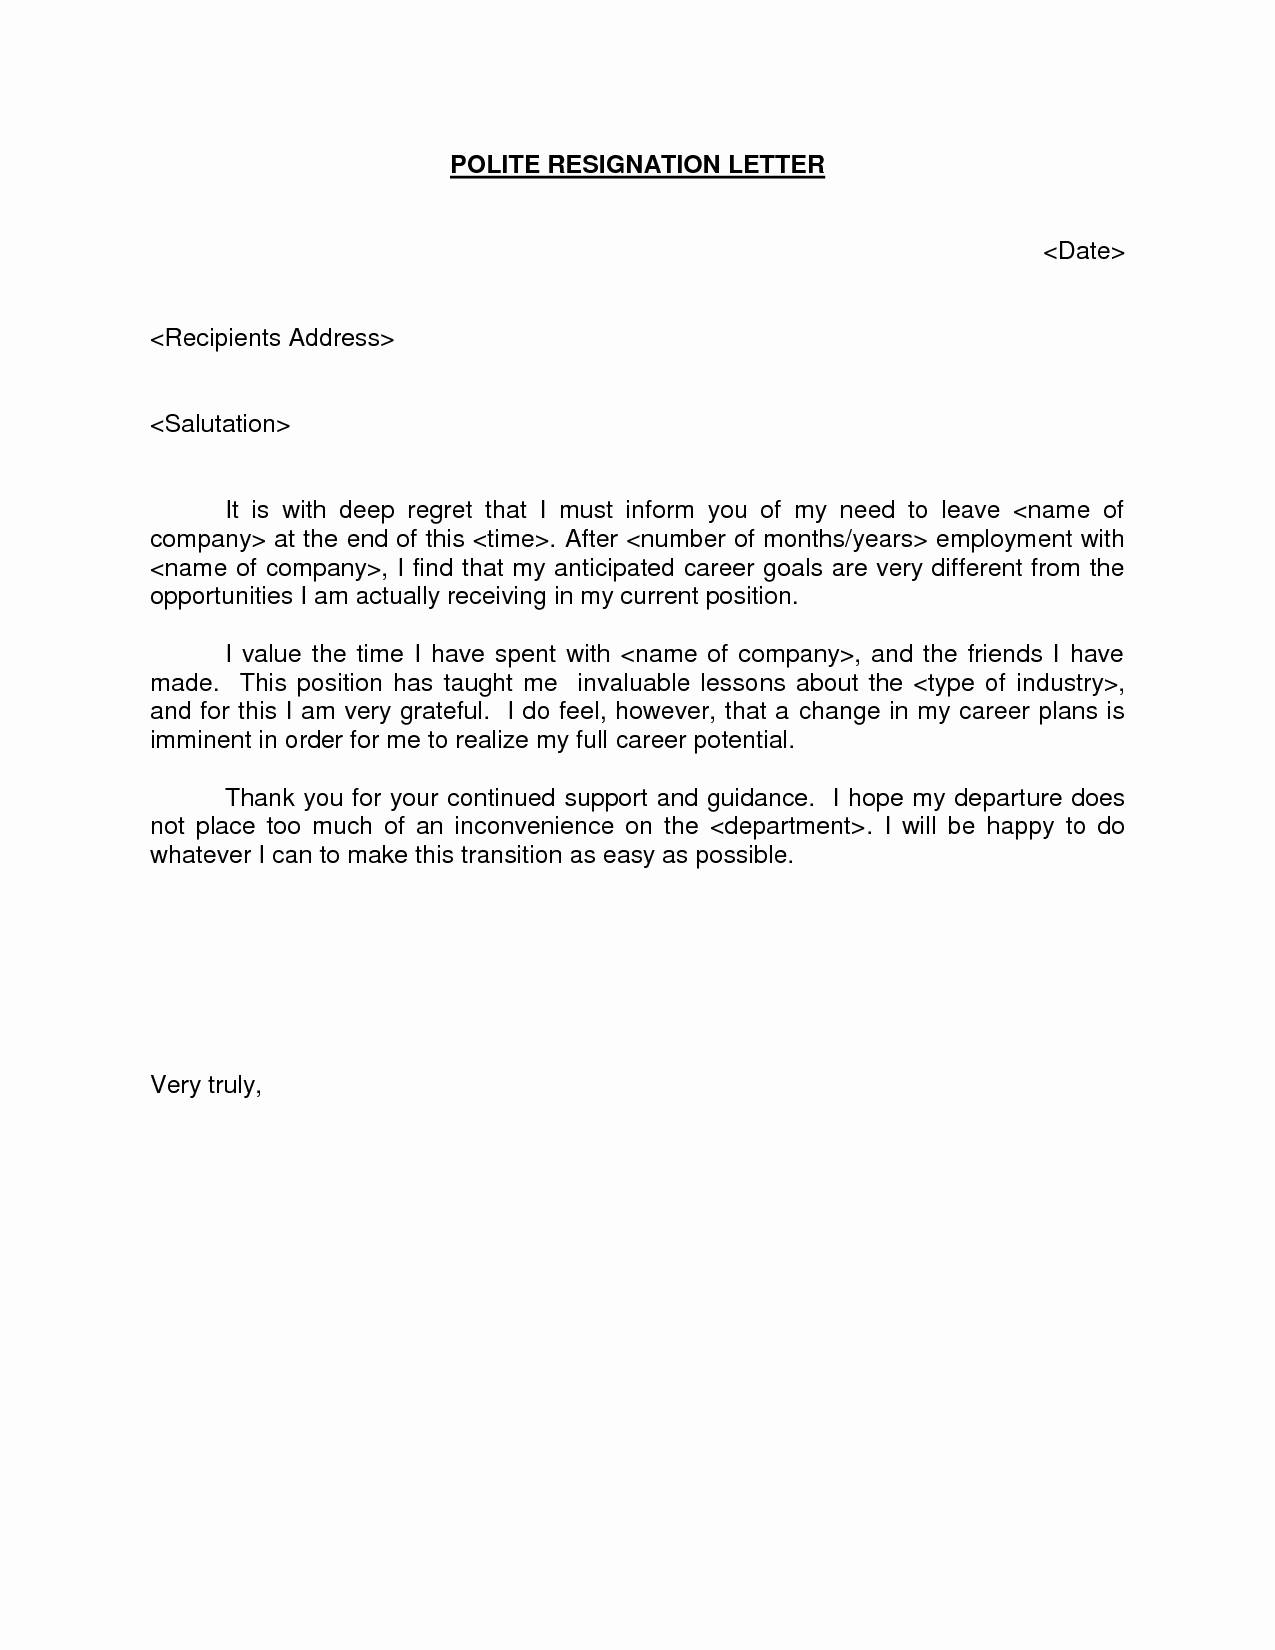 in kind donation letter template Collection-Donation Letter Template for Schools Unique Polite Resignation Letter Bestdealformoneywriting A Letter 16-k